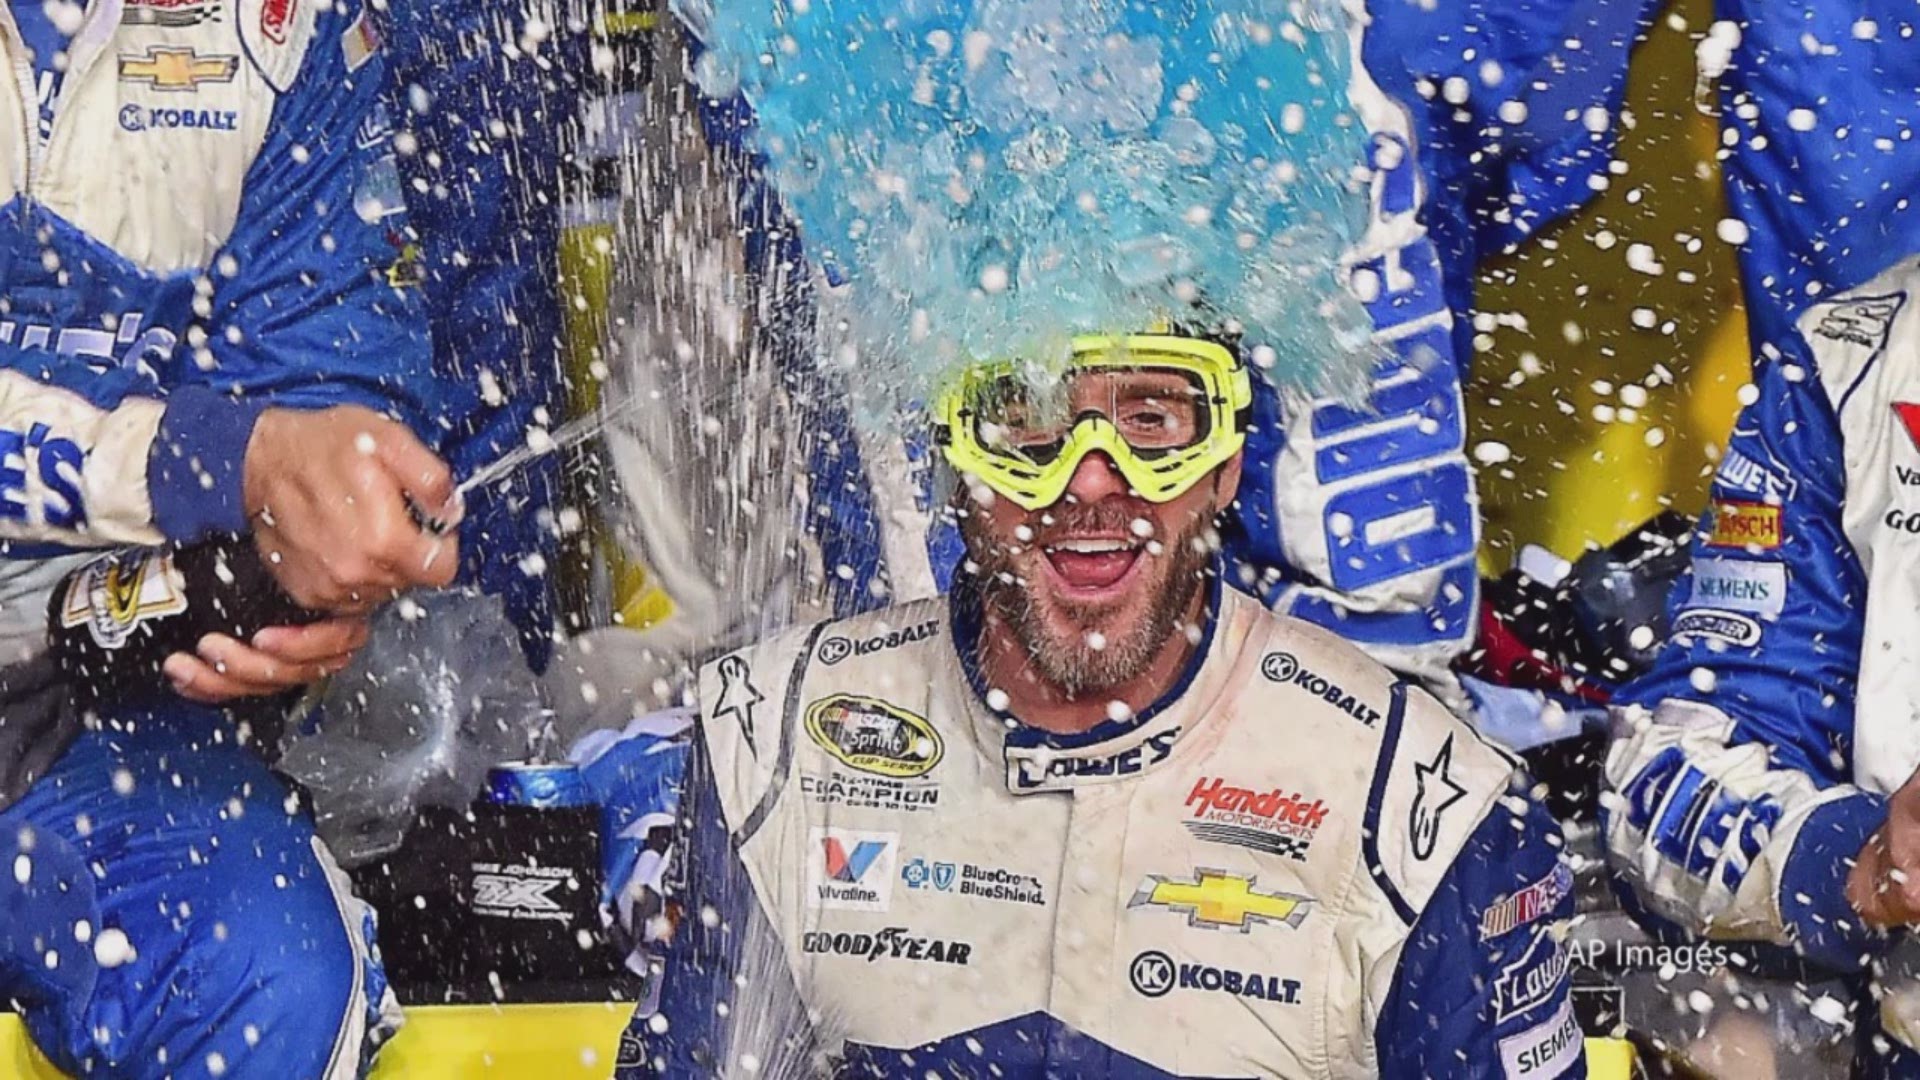 In 2020, Jimmie Johnson will have one last season to chase a record eighth championship in the Cup Series.